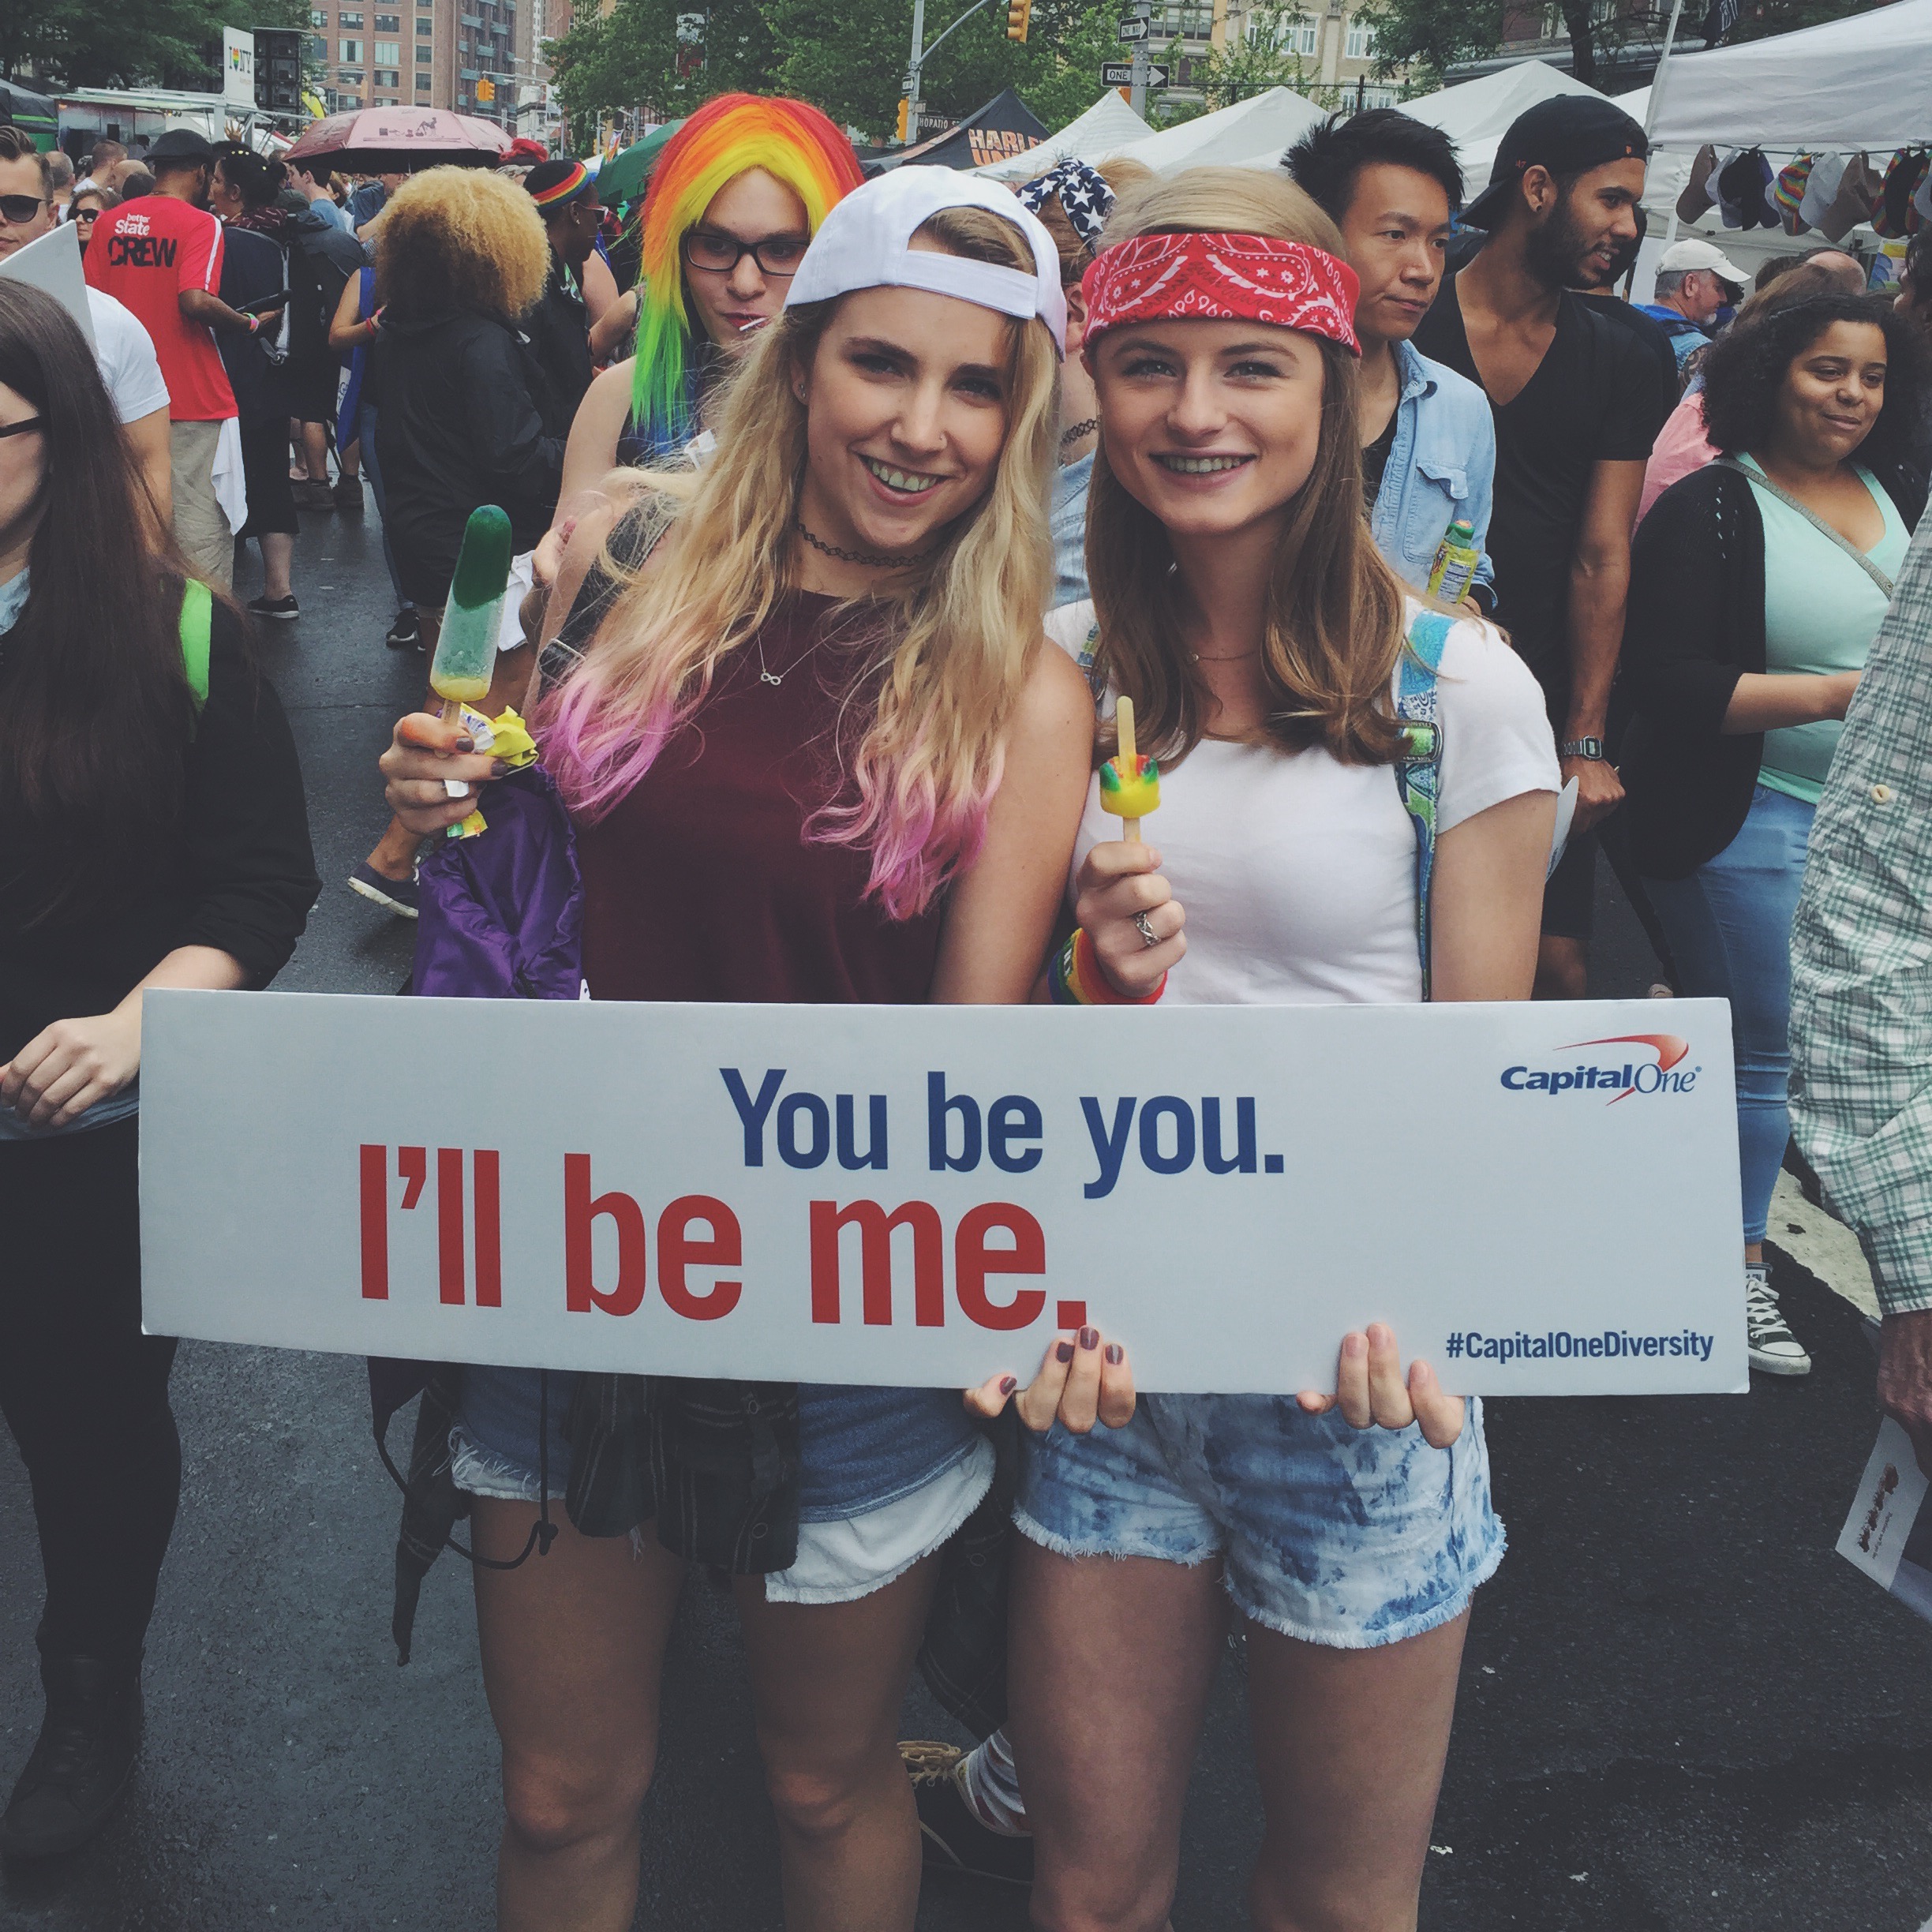 two friends holding a "you be you. I'll be me." sign created by Capital One.They are at the NYC Gay Pride Parade